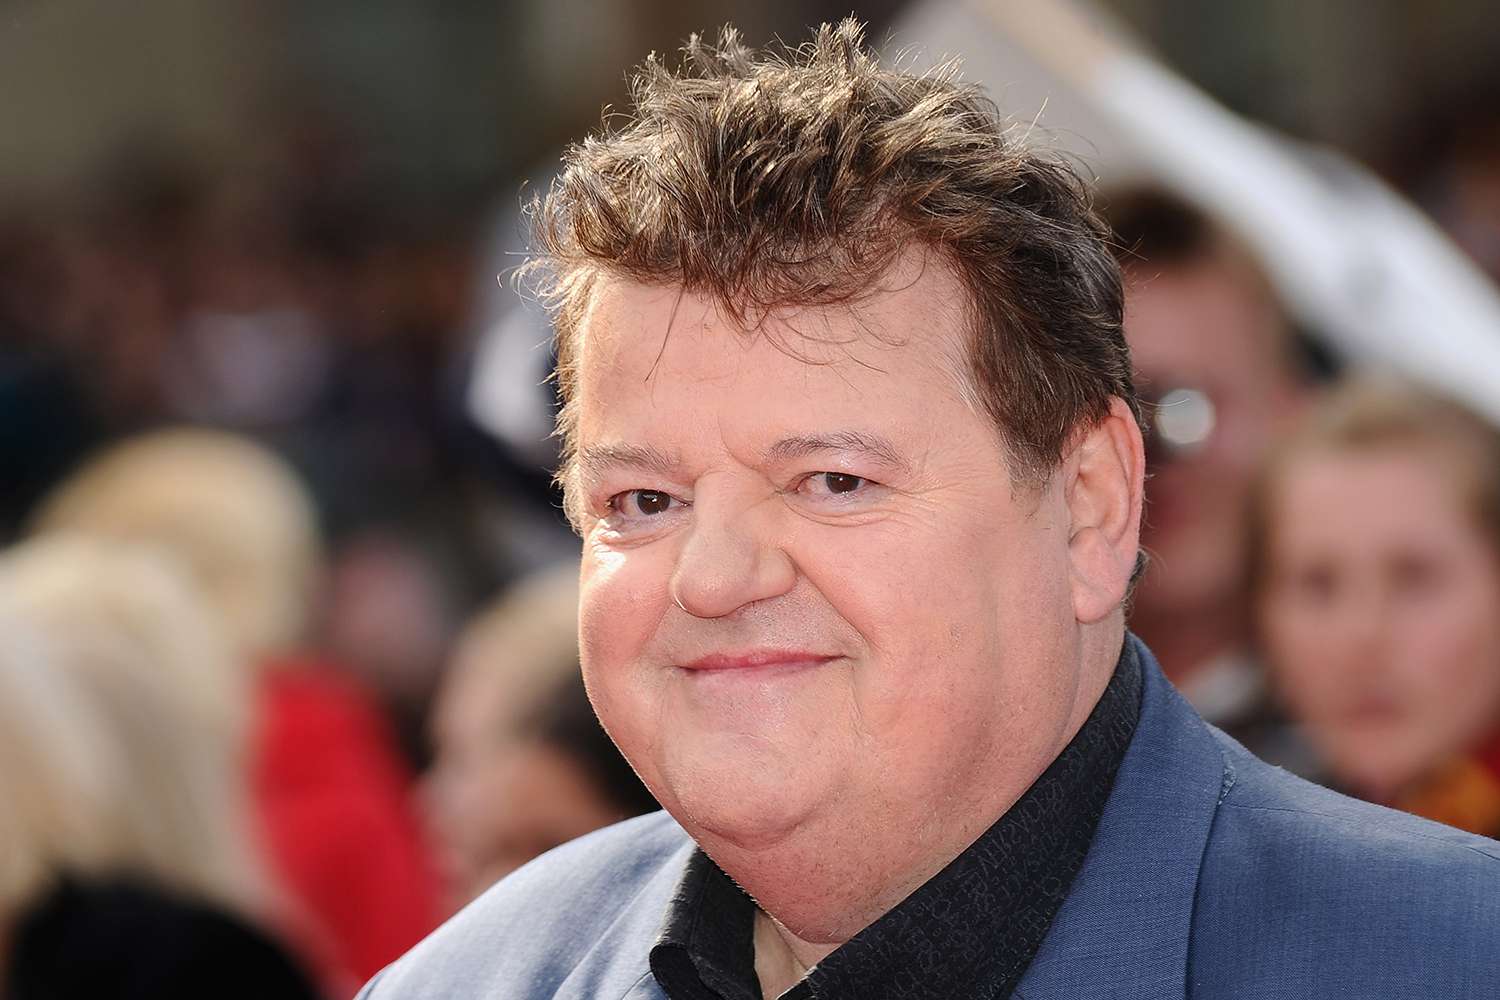 Robbie Coltrane’s cause of death revealed